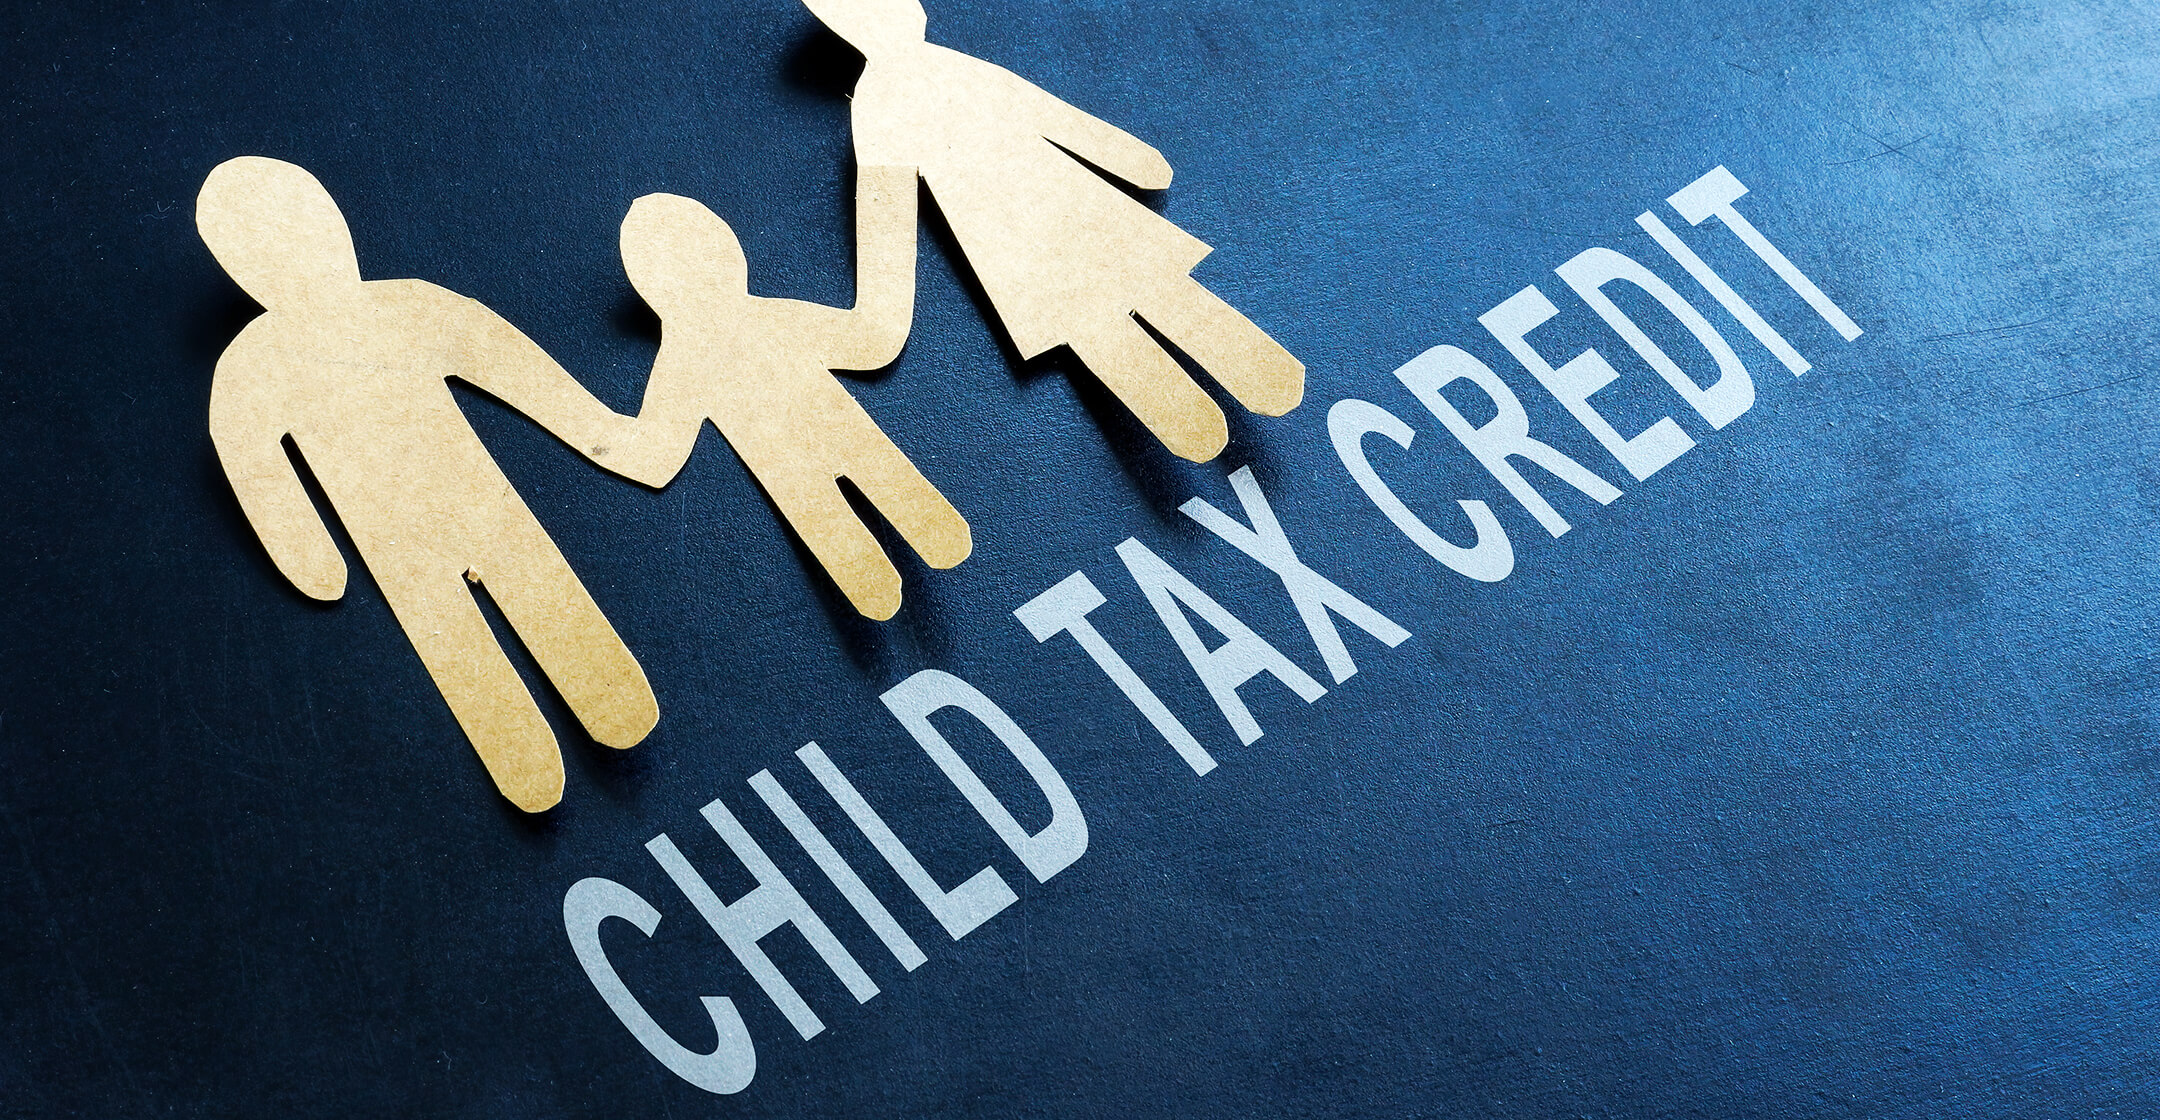 Child Tax Credit Basics - What You Need to Know